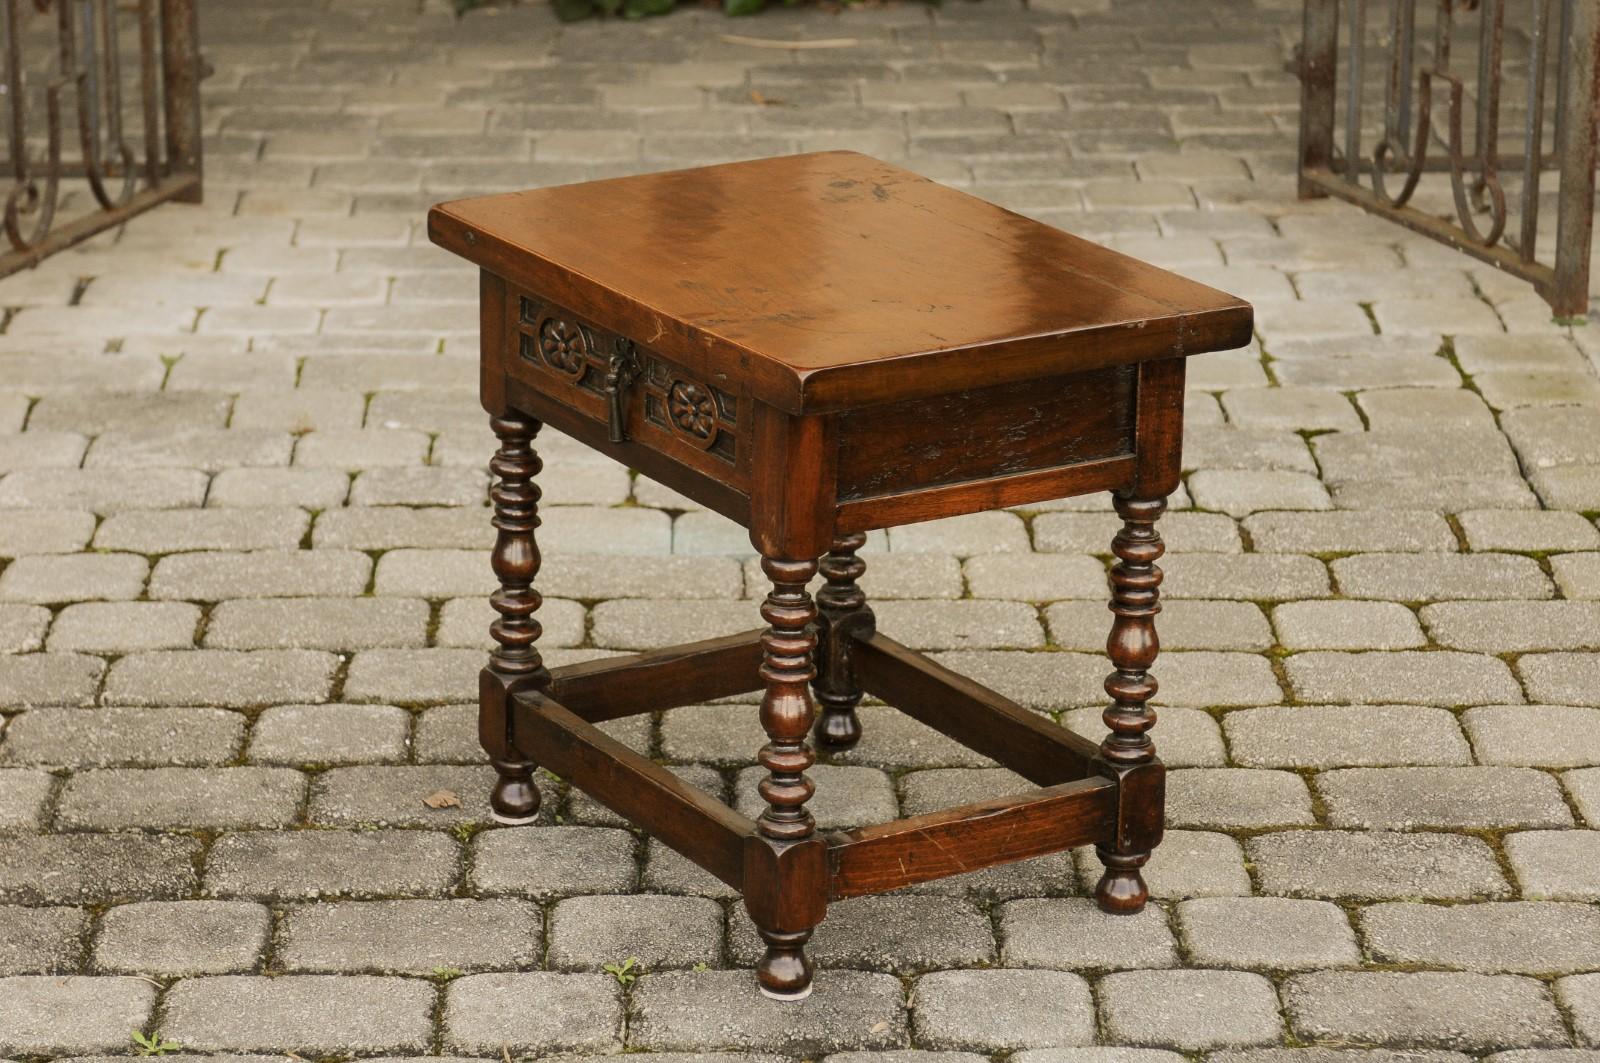 Italian 1900s Walnut Side Table with Drawer, Carved Rosettes and Turned Legs For Sale 6